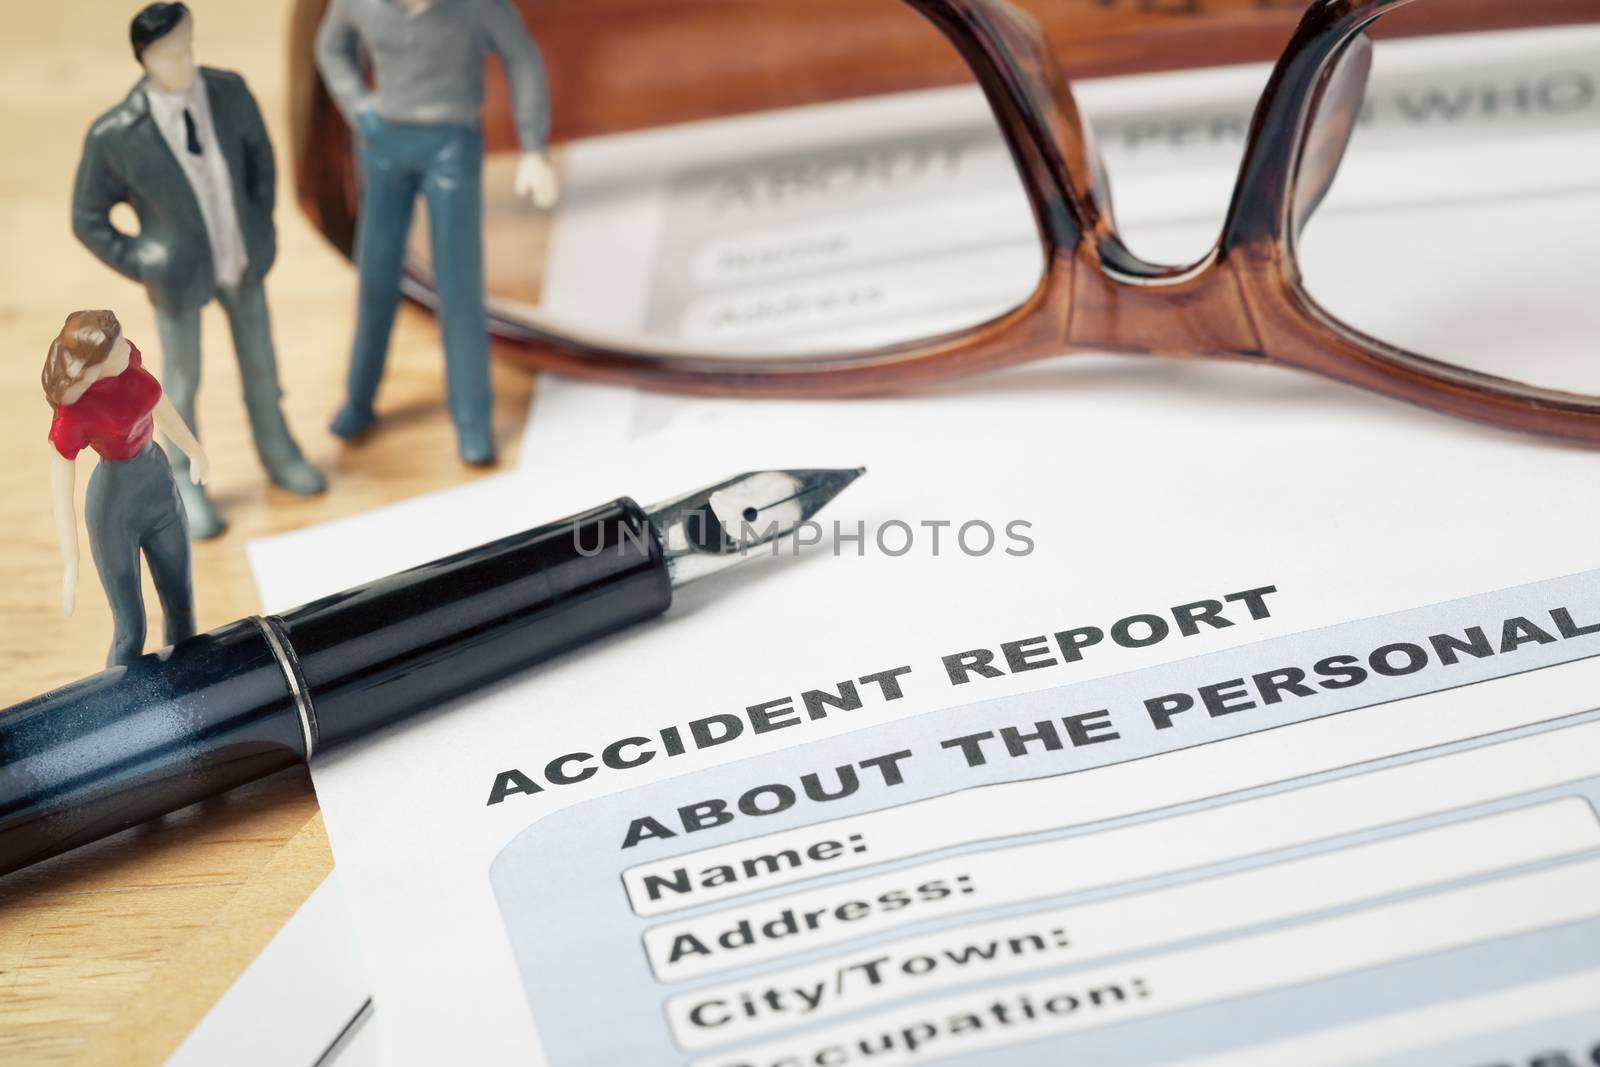 Accident report application form and pen on brown envelope and e by FrameAngel